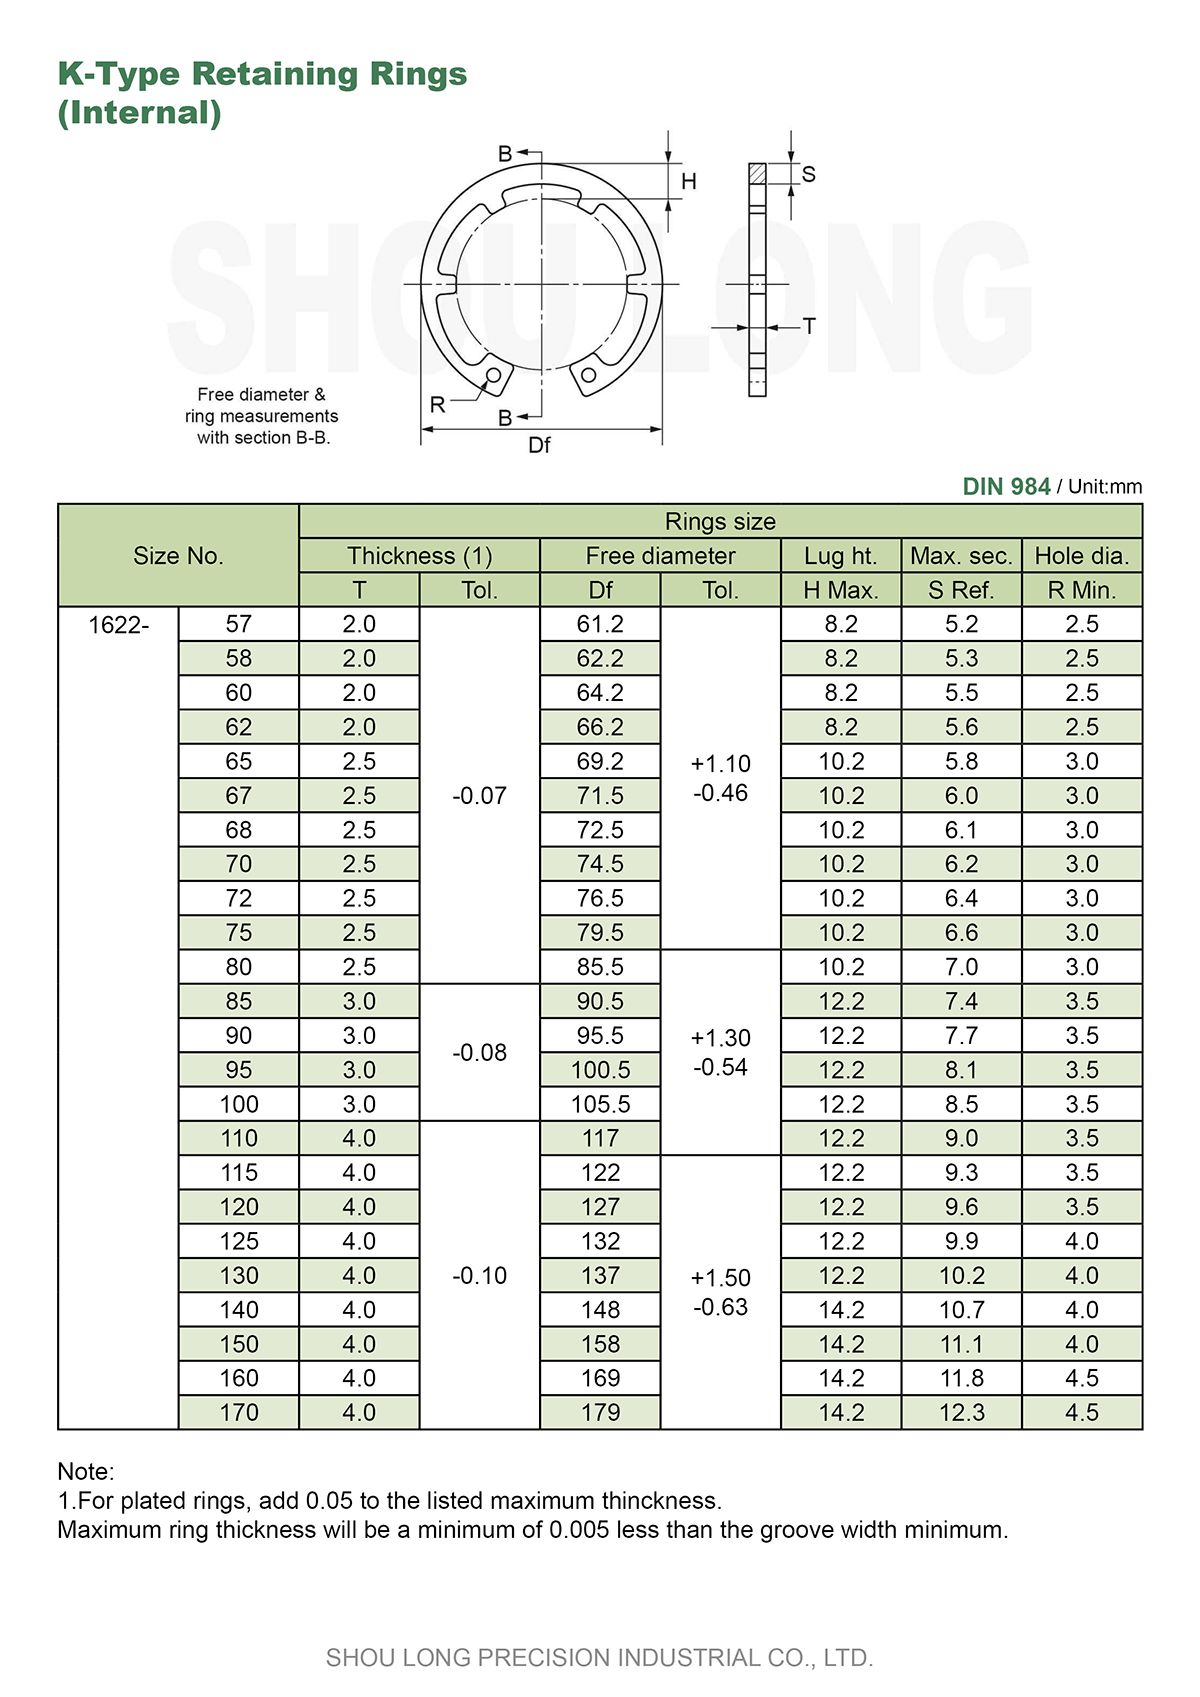 Spec of Metric K-Type Retaining Rings for Bores DIN984-2